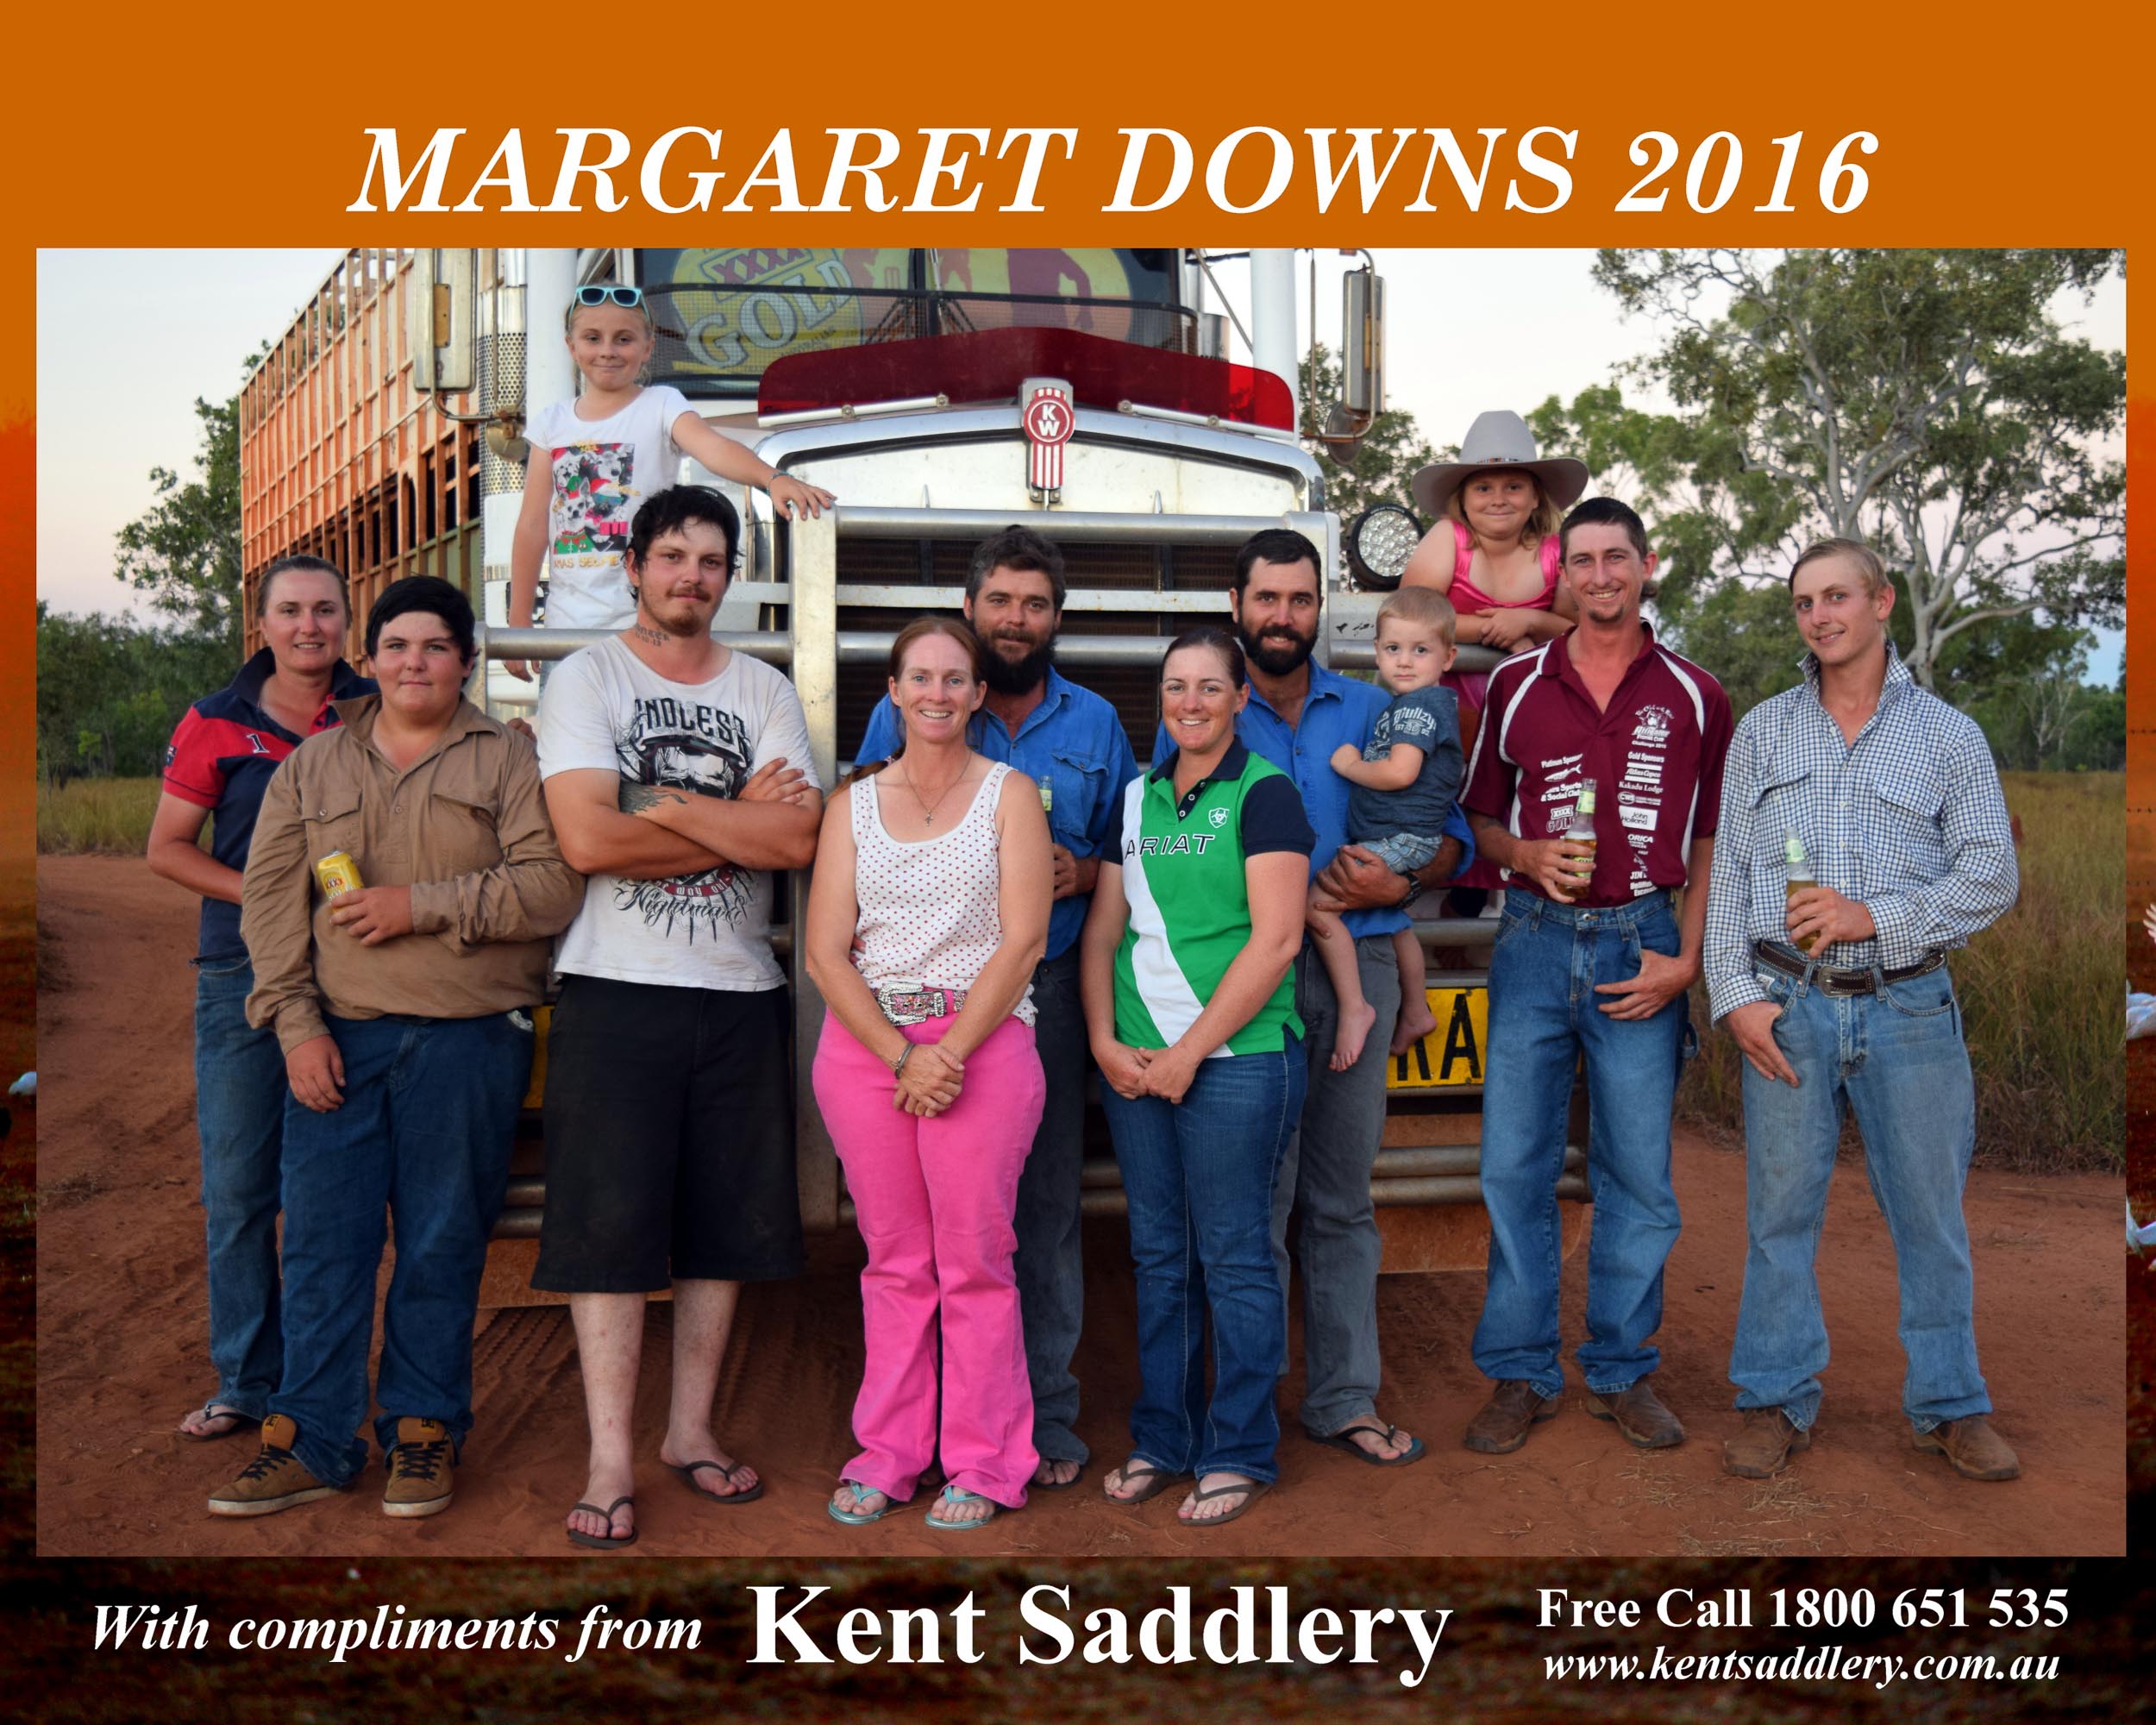 Northern Territory - Margaret Downs 15